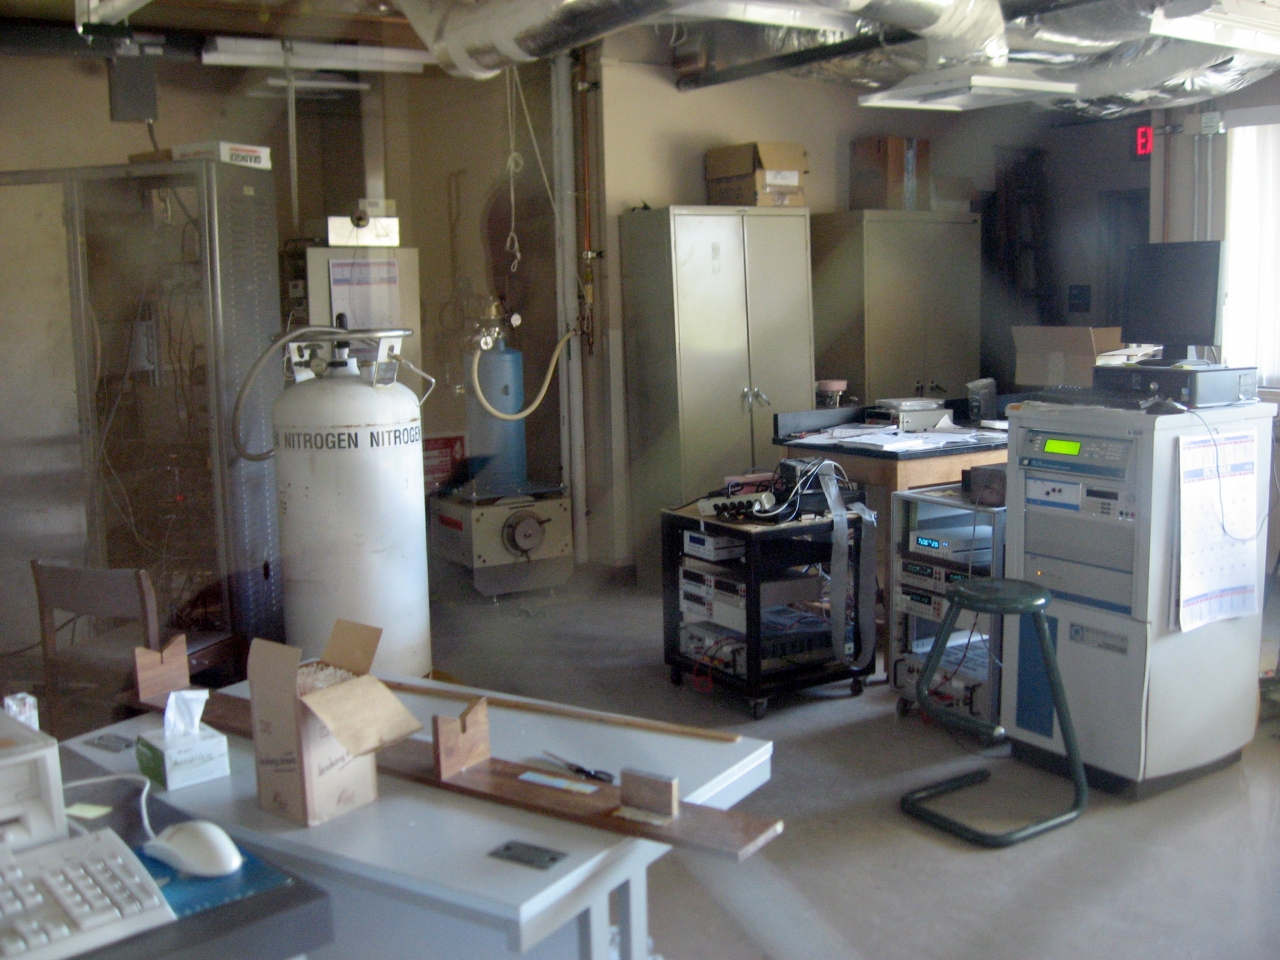 Magnet laboratory and equipment.